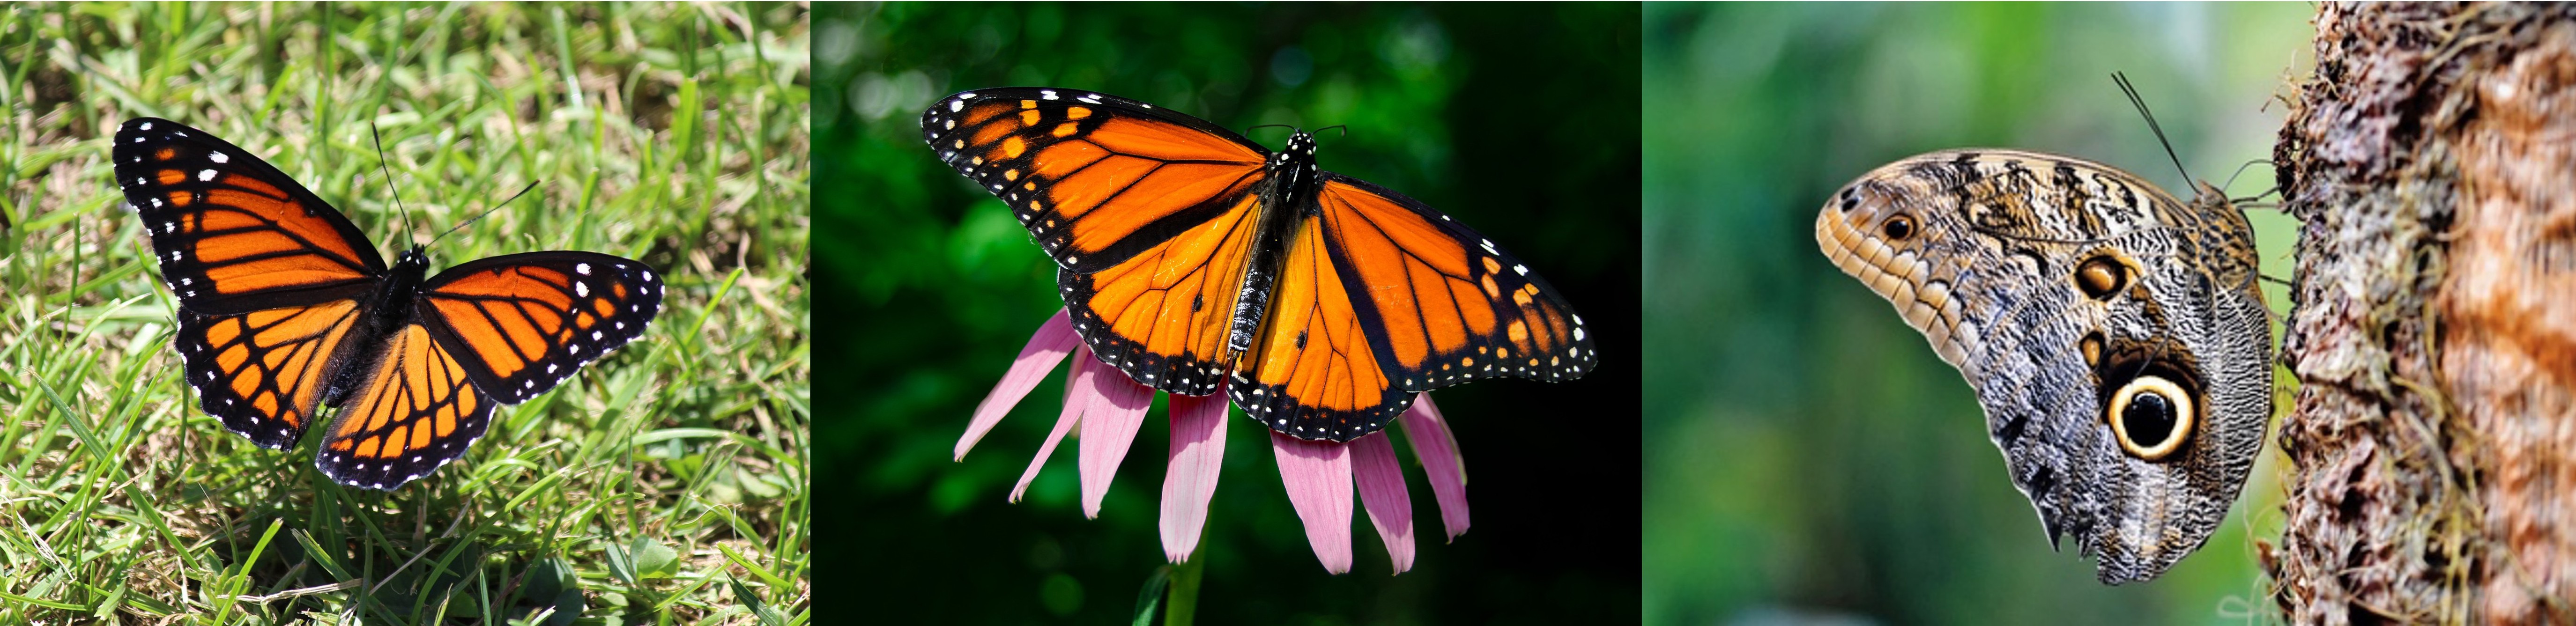 Examples of a Viceroy butterfly that mimics the Monarch butterfly an an owl butterfly that use mimicry to look like an owl's eyes